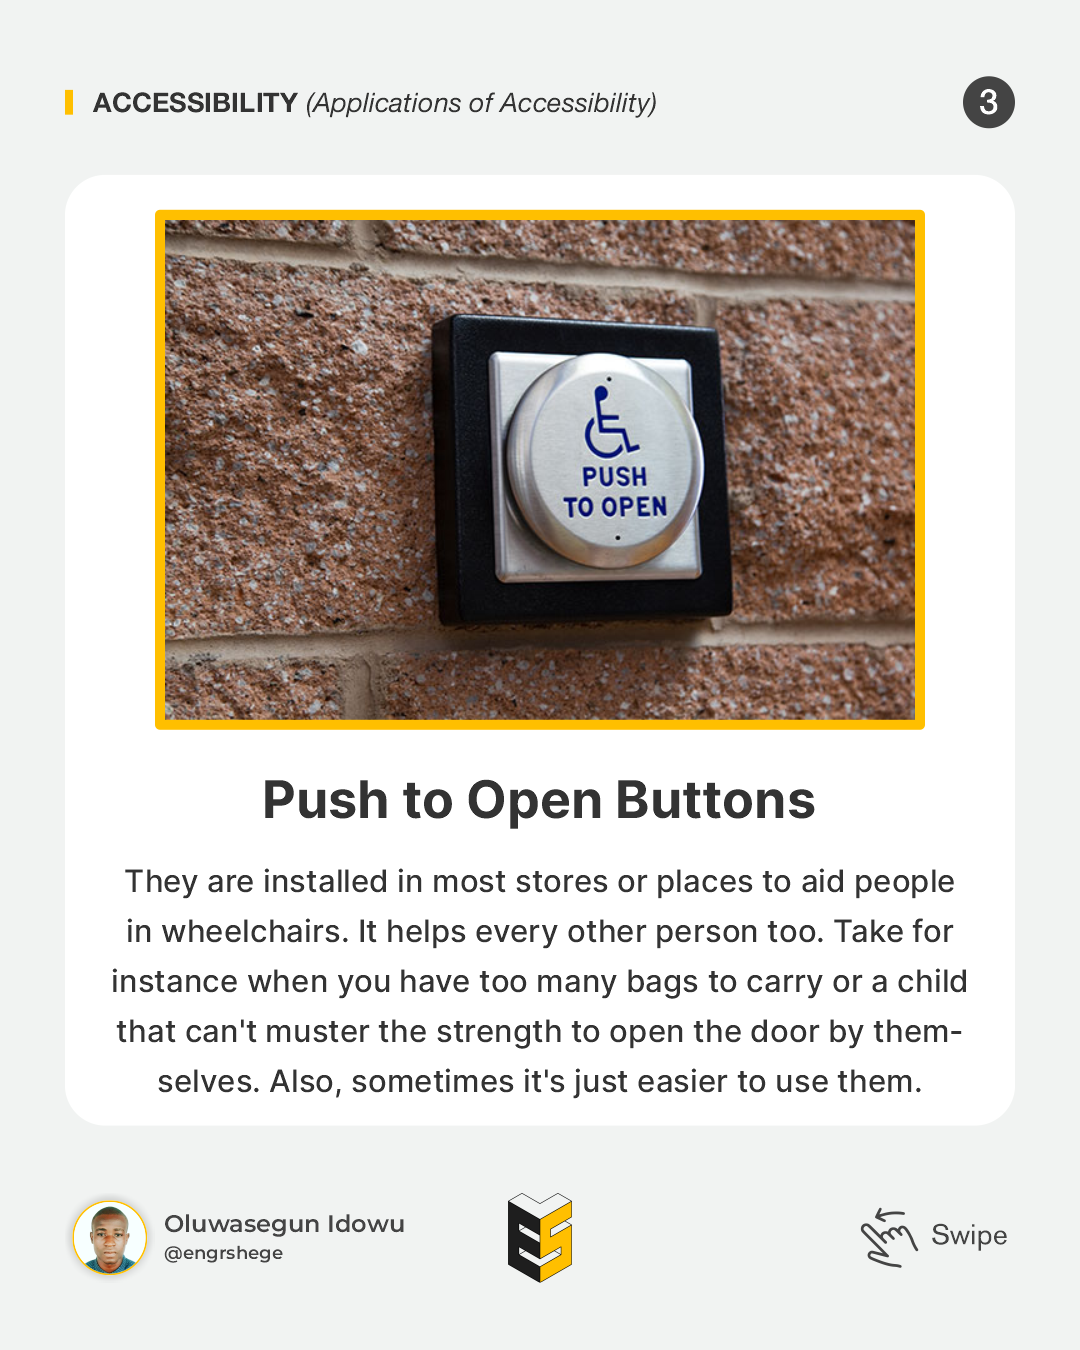 3. Applications of Accessibility (Push to Open Buttons)